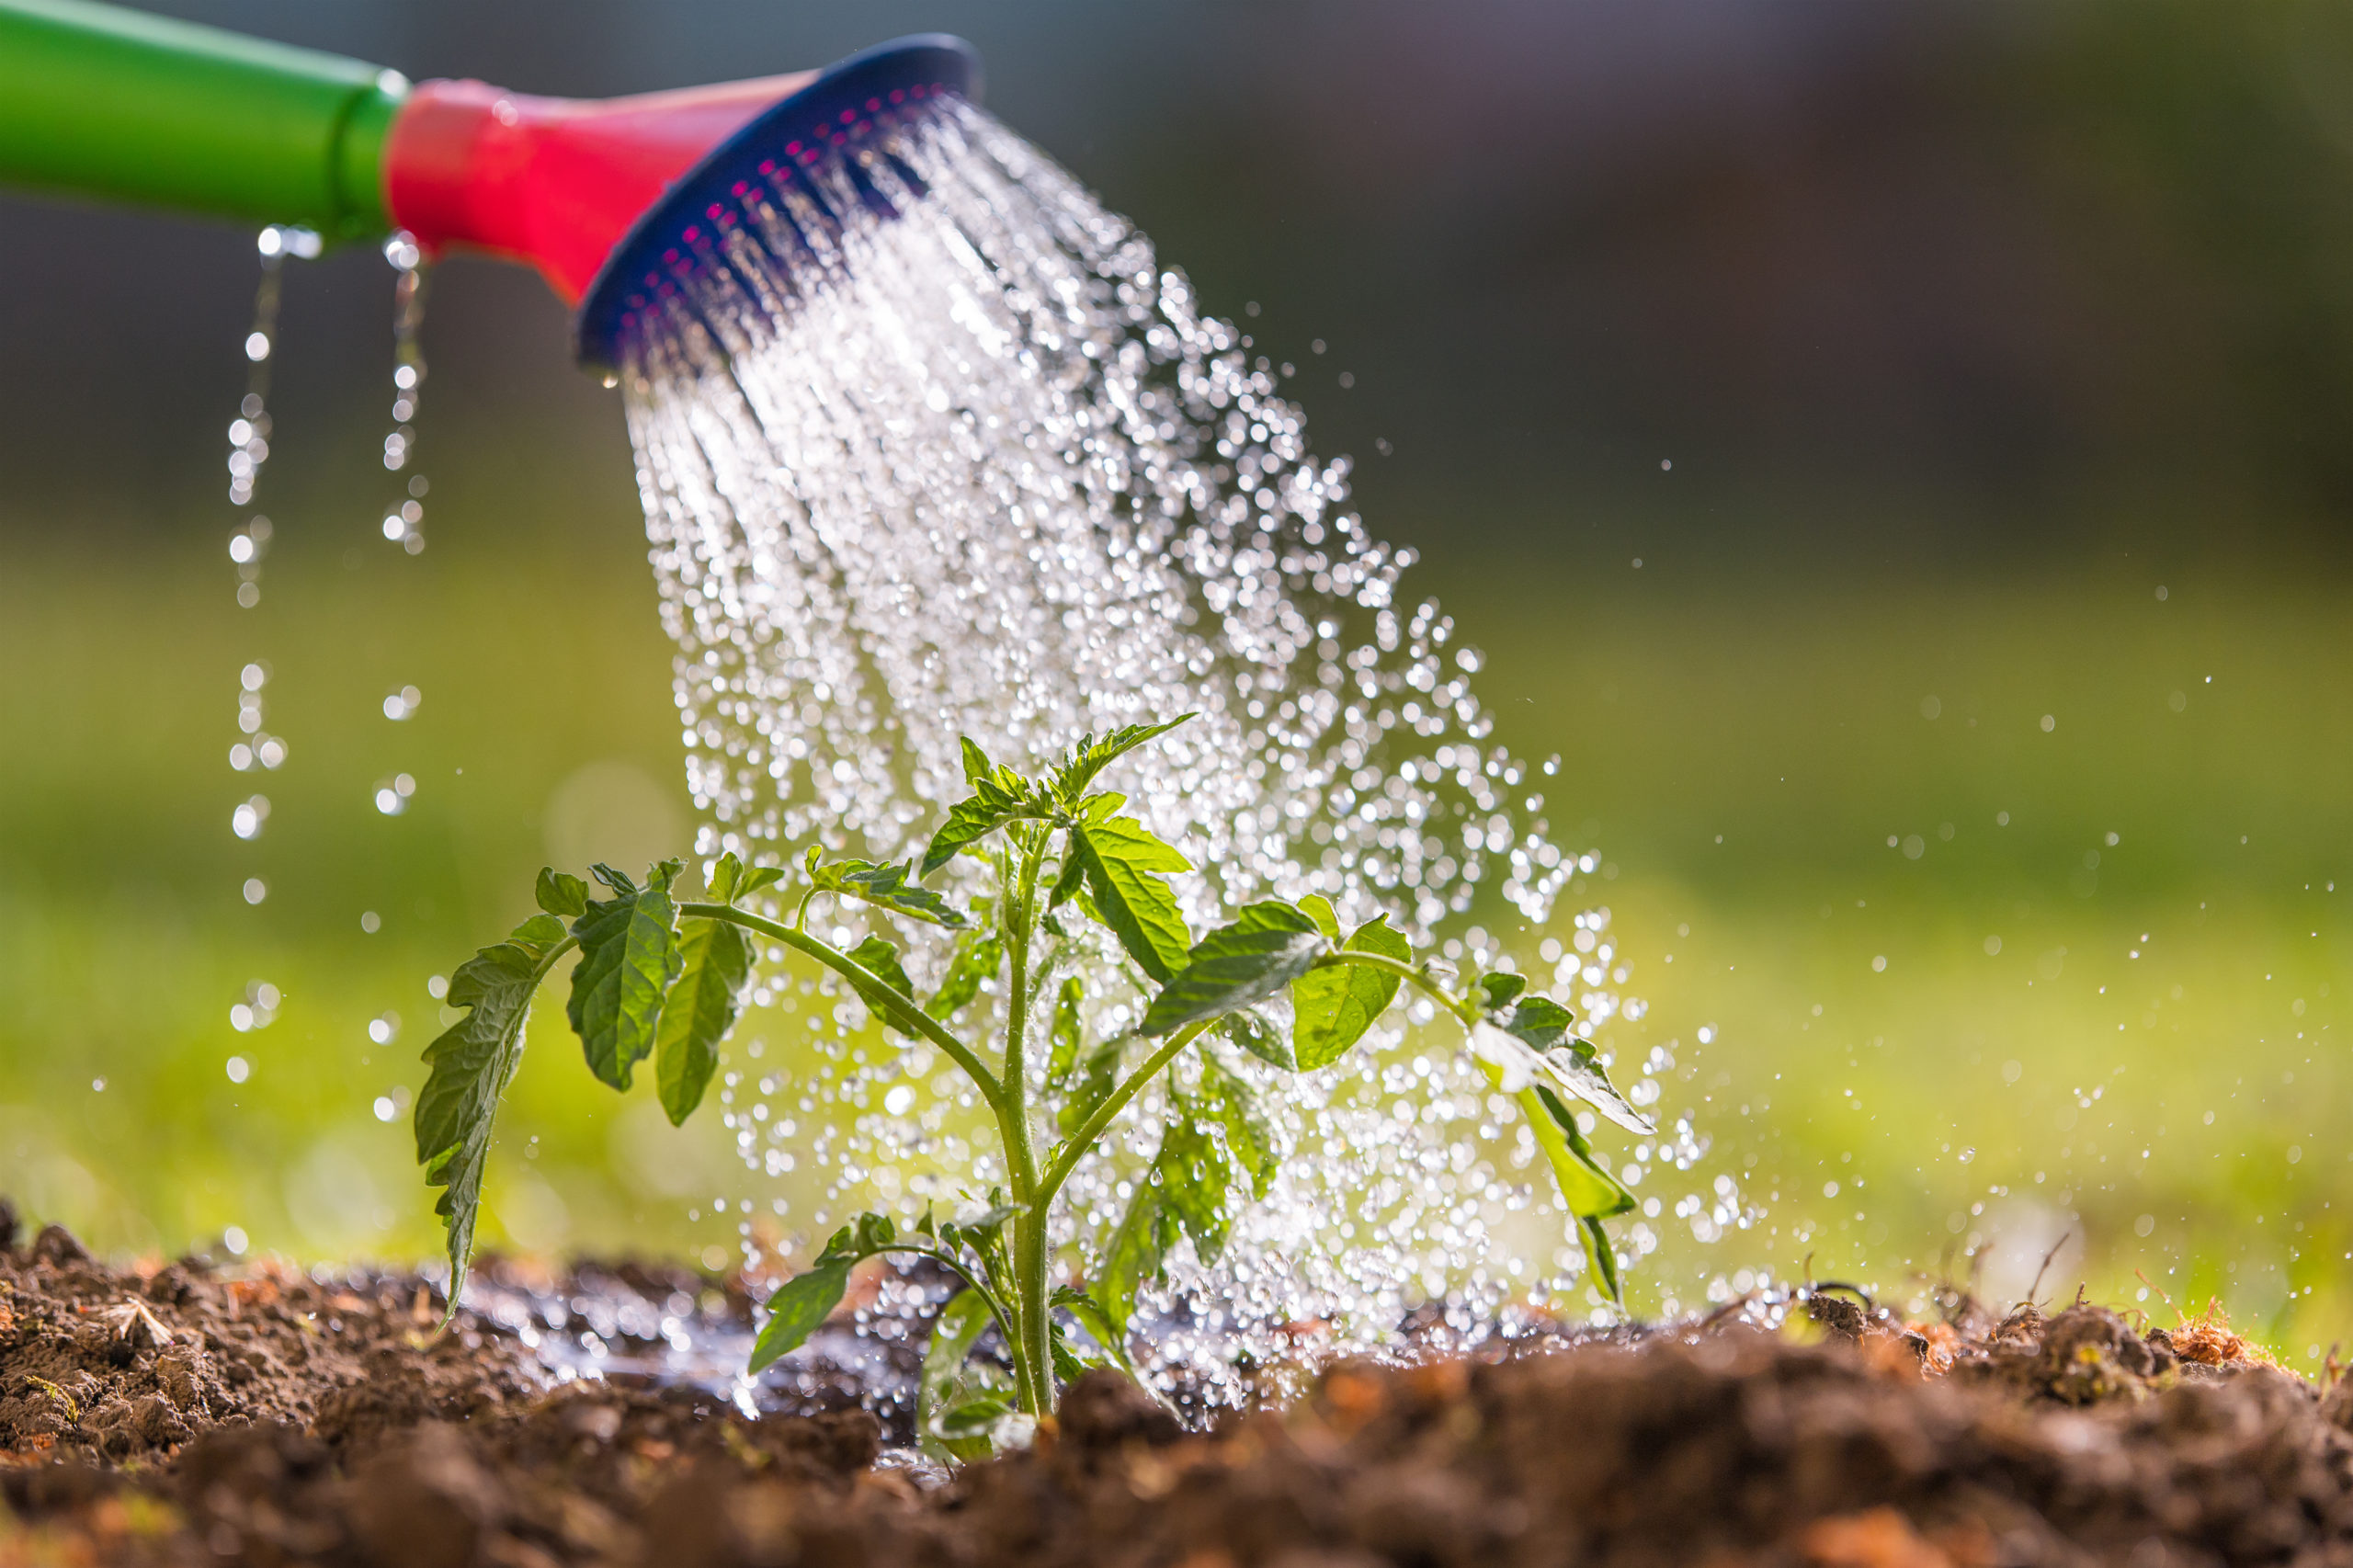 Watering is time-consuming during dry spells